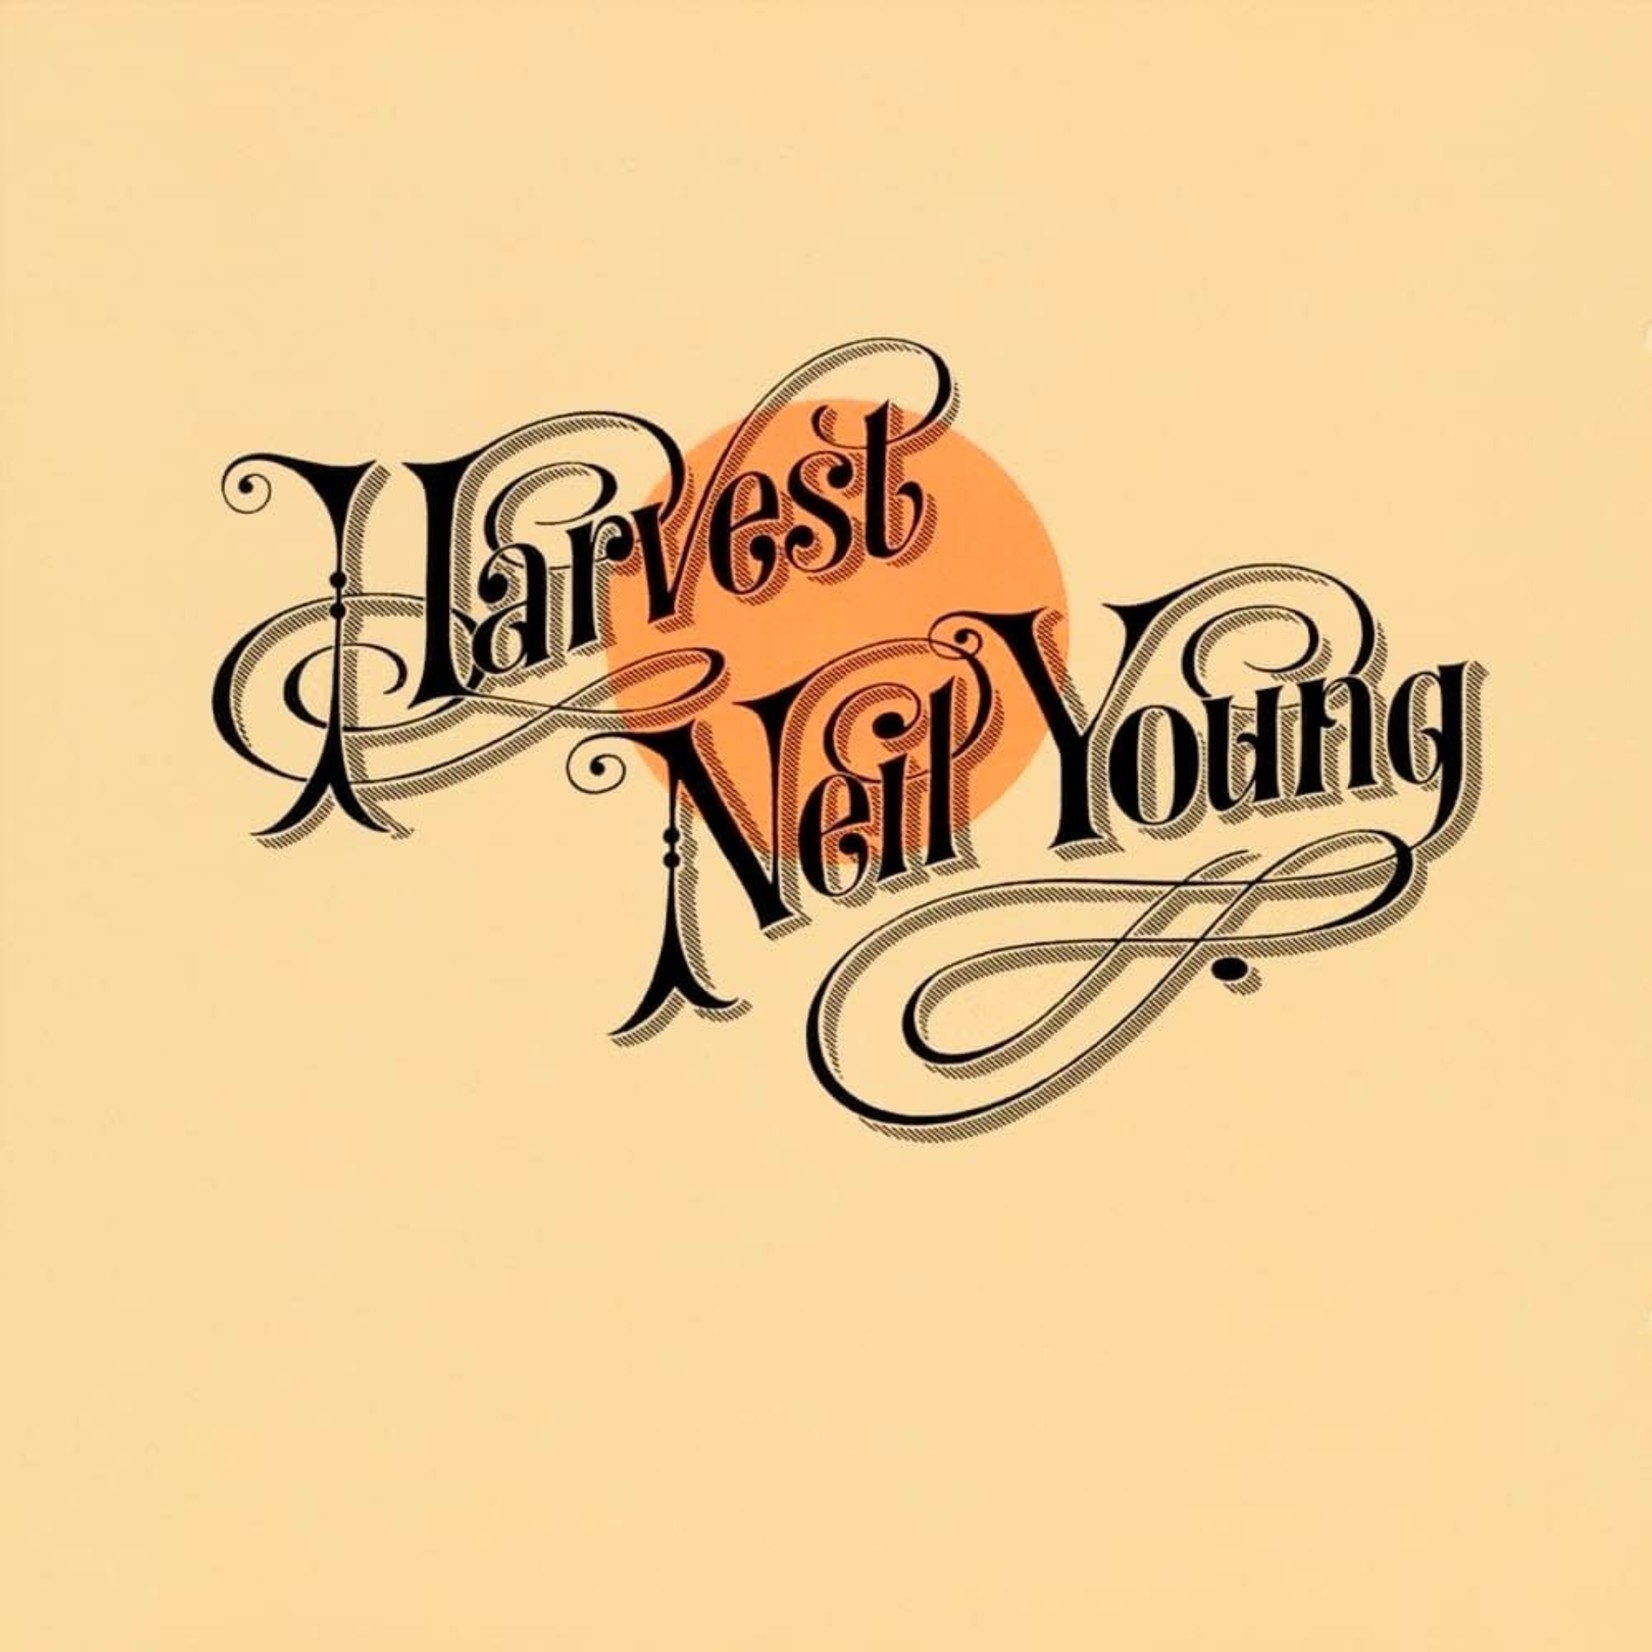 [New] Neil Young - Harvest (Neil Young Archives Series)